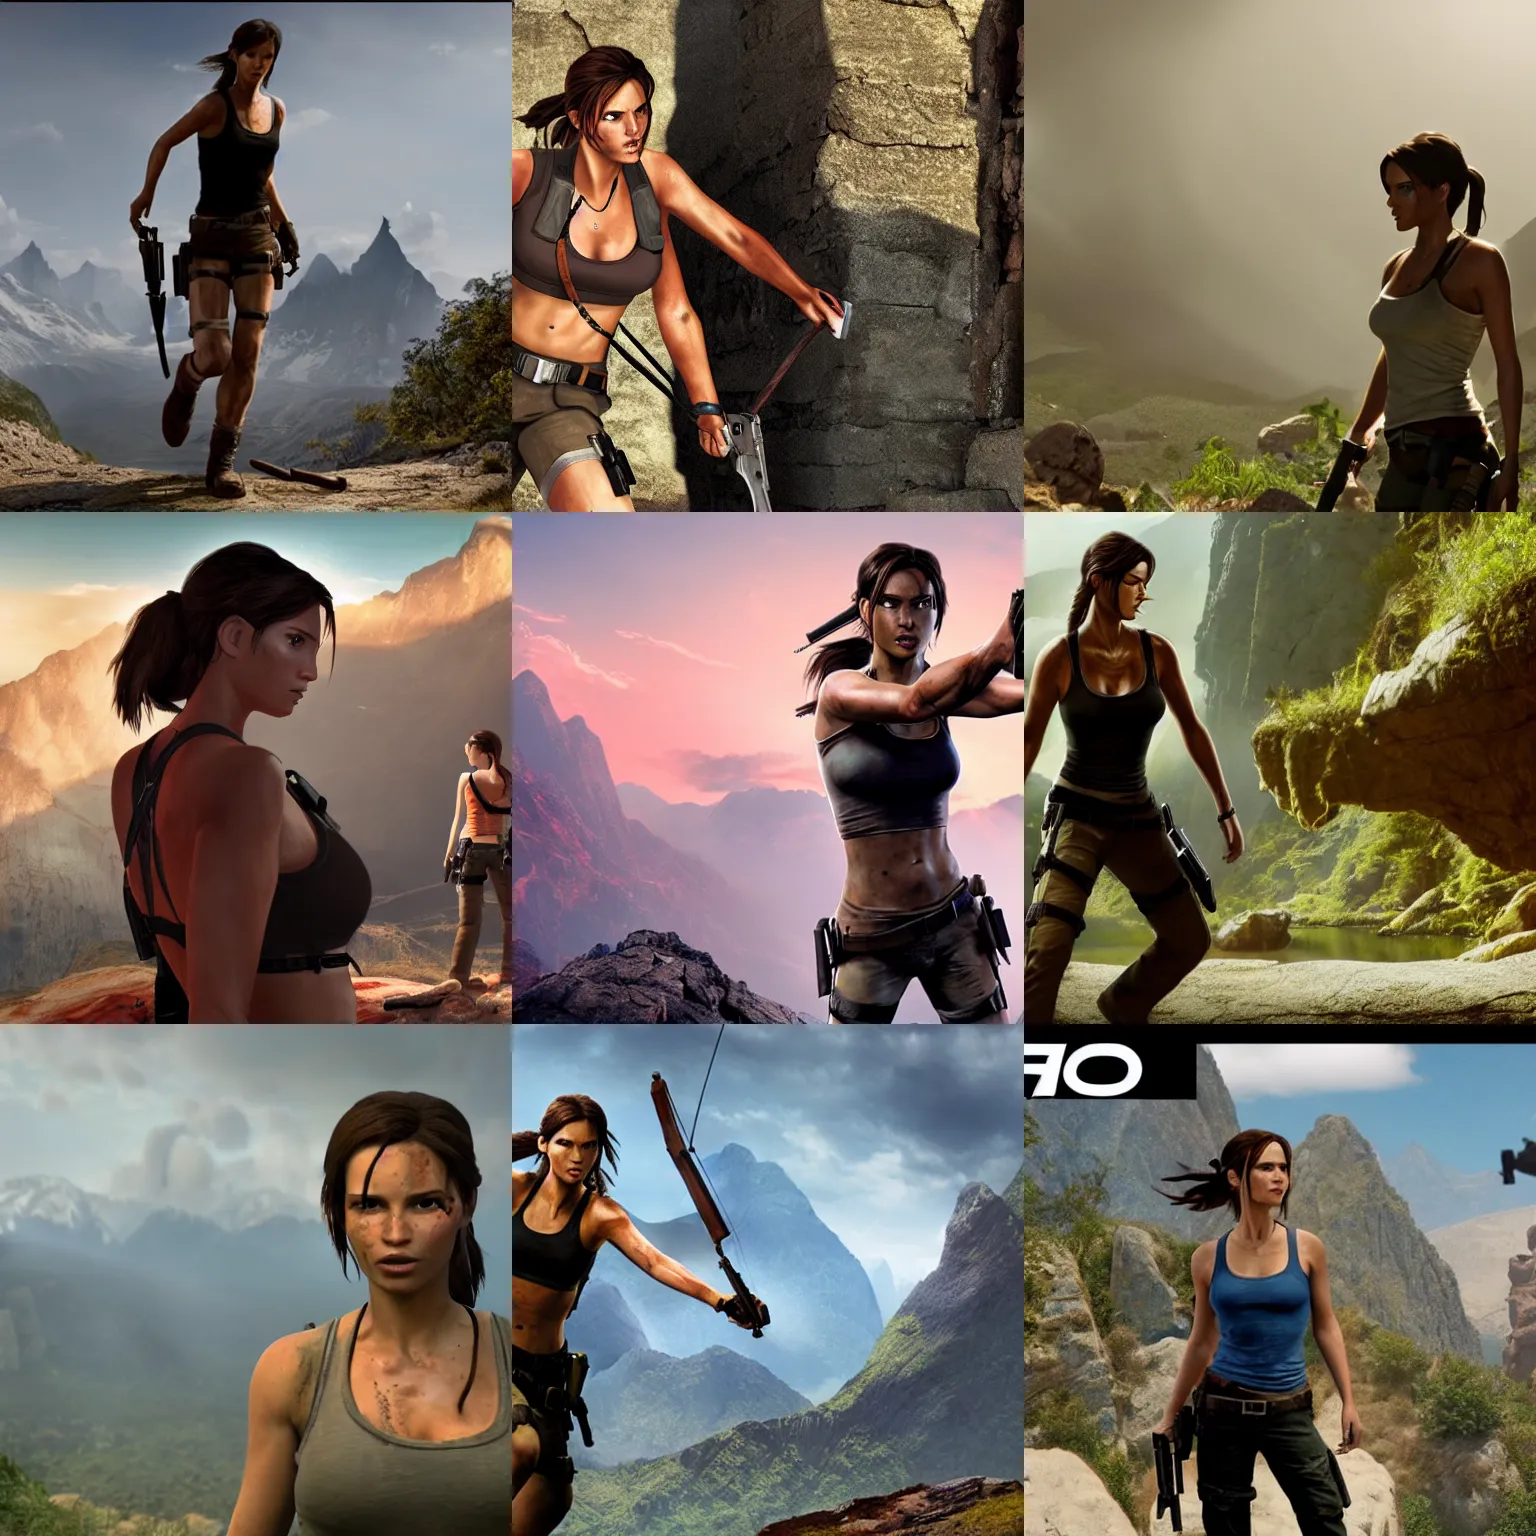 Prompt: a still from the movie with Lara Croft (starring Jack Stauber), award-winning cinematography, 4k